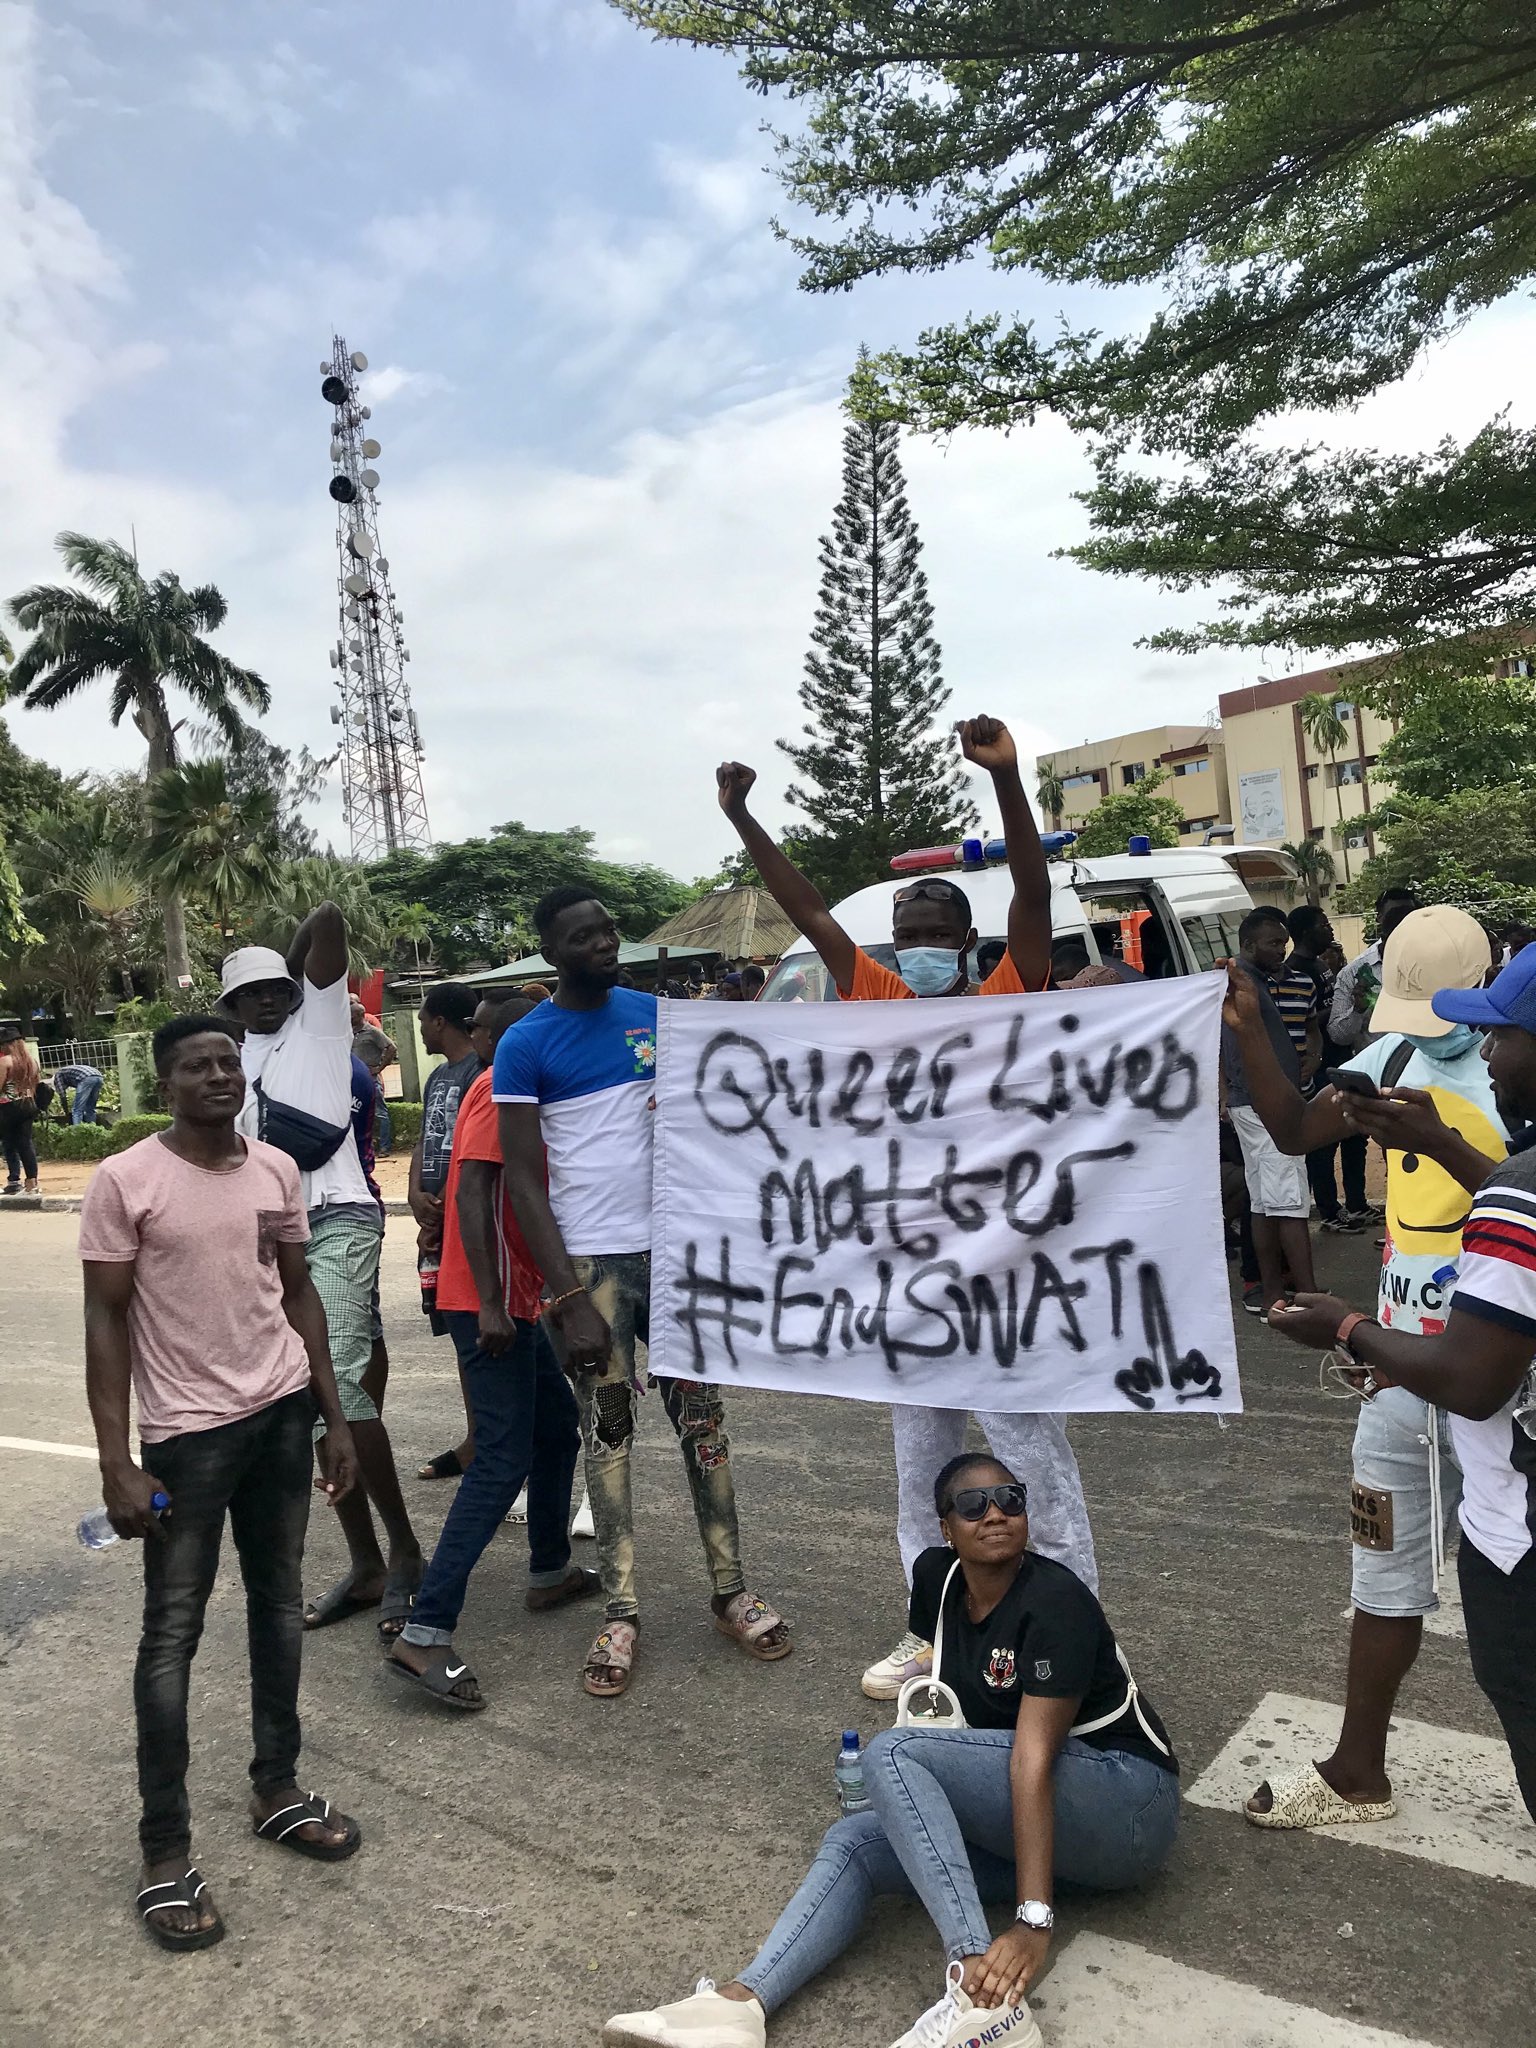 Image shows Nigerian activists standing behind a sign with raised fists. The sign reads 'Queer lives Matter #EndSARS'